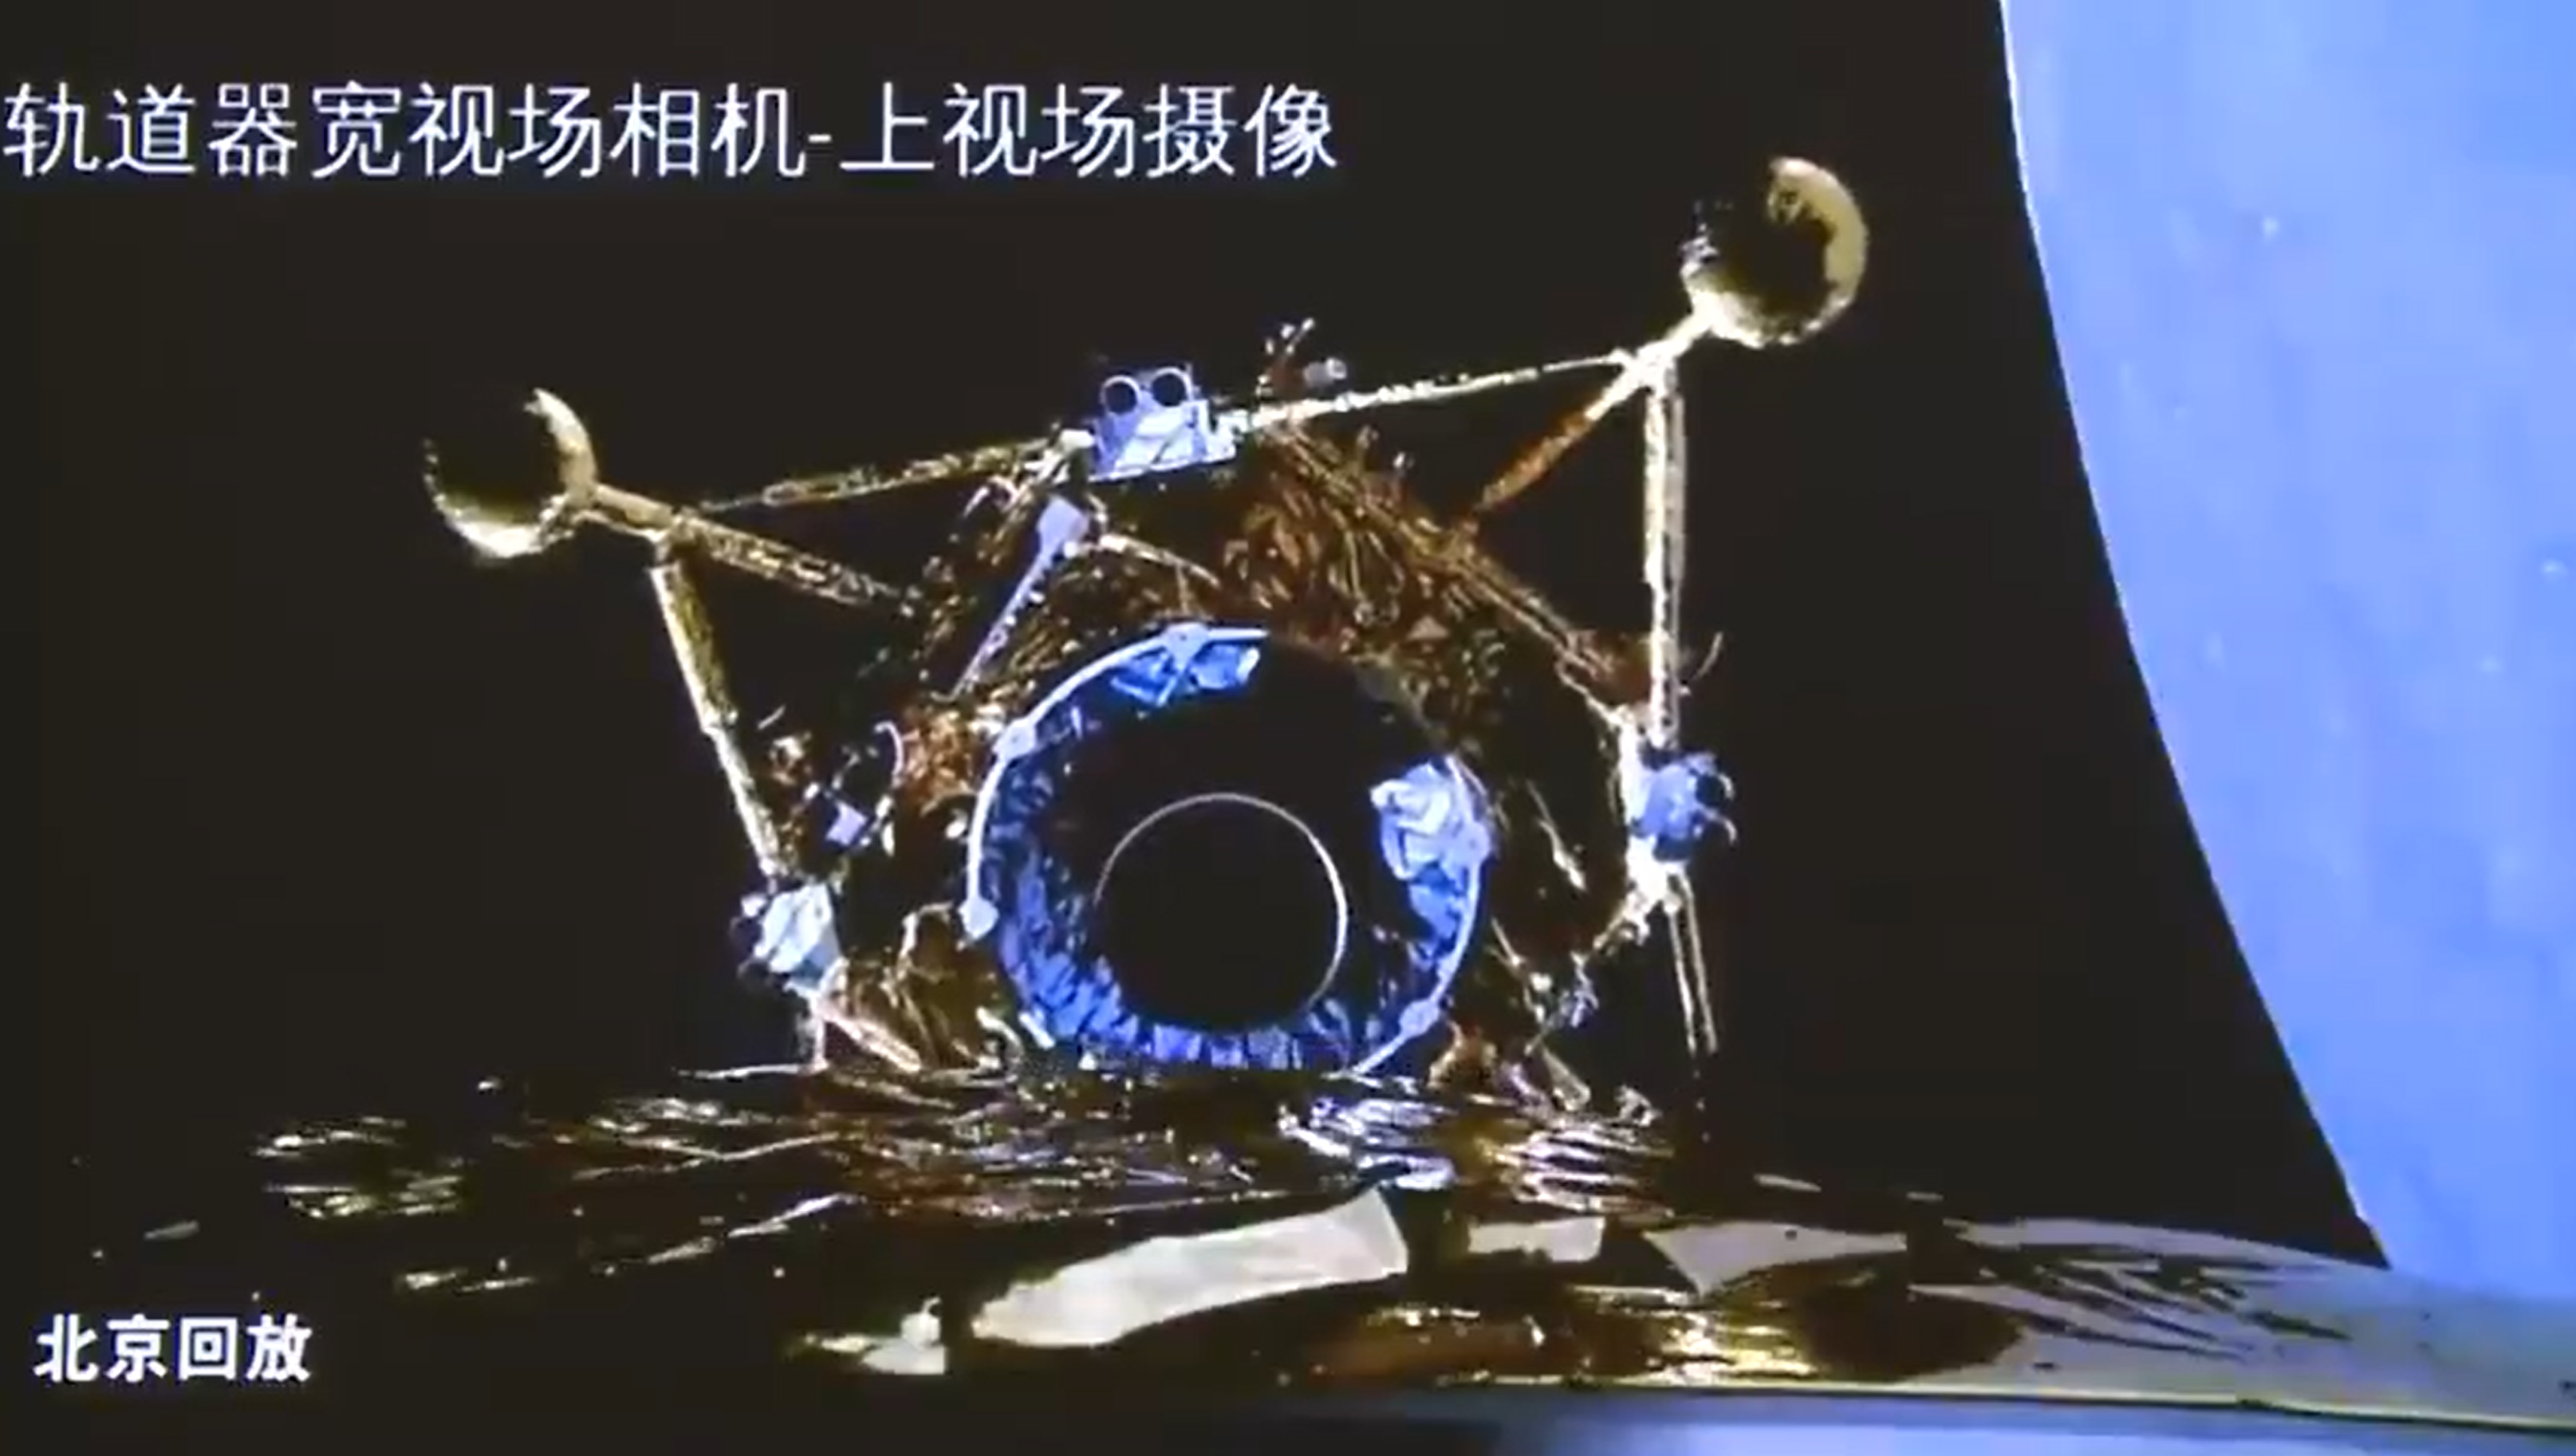 ESA - Chang'e 1 - new mission to Moon lifts off